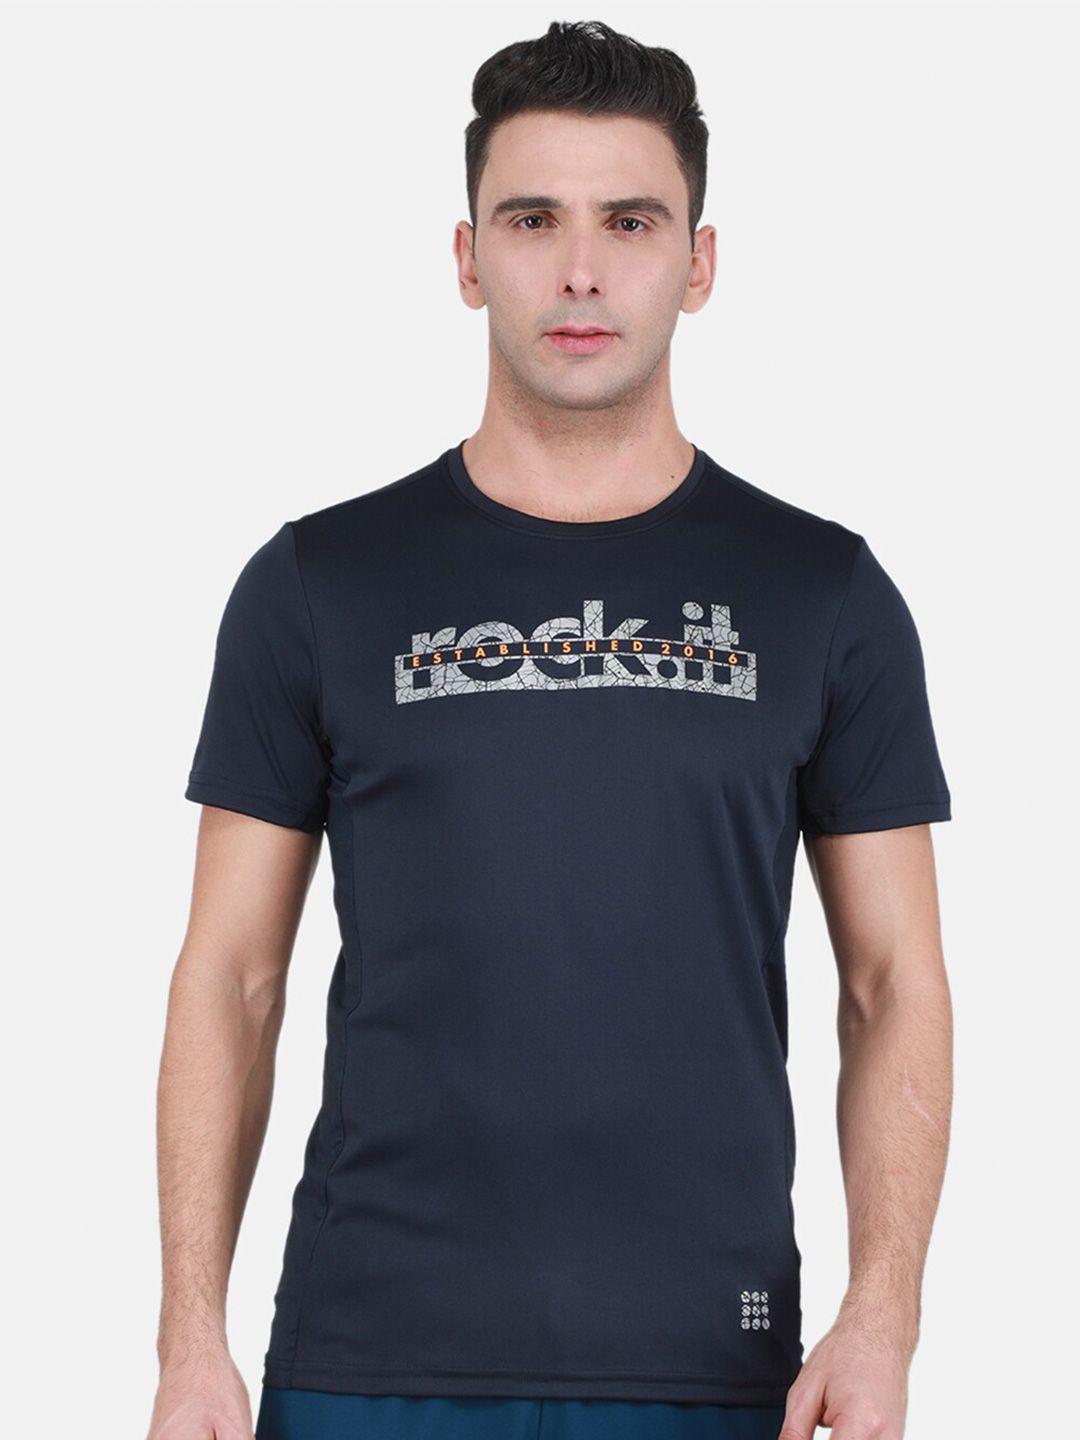 rock.it typography printed casual t-shirt